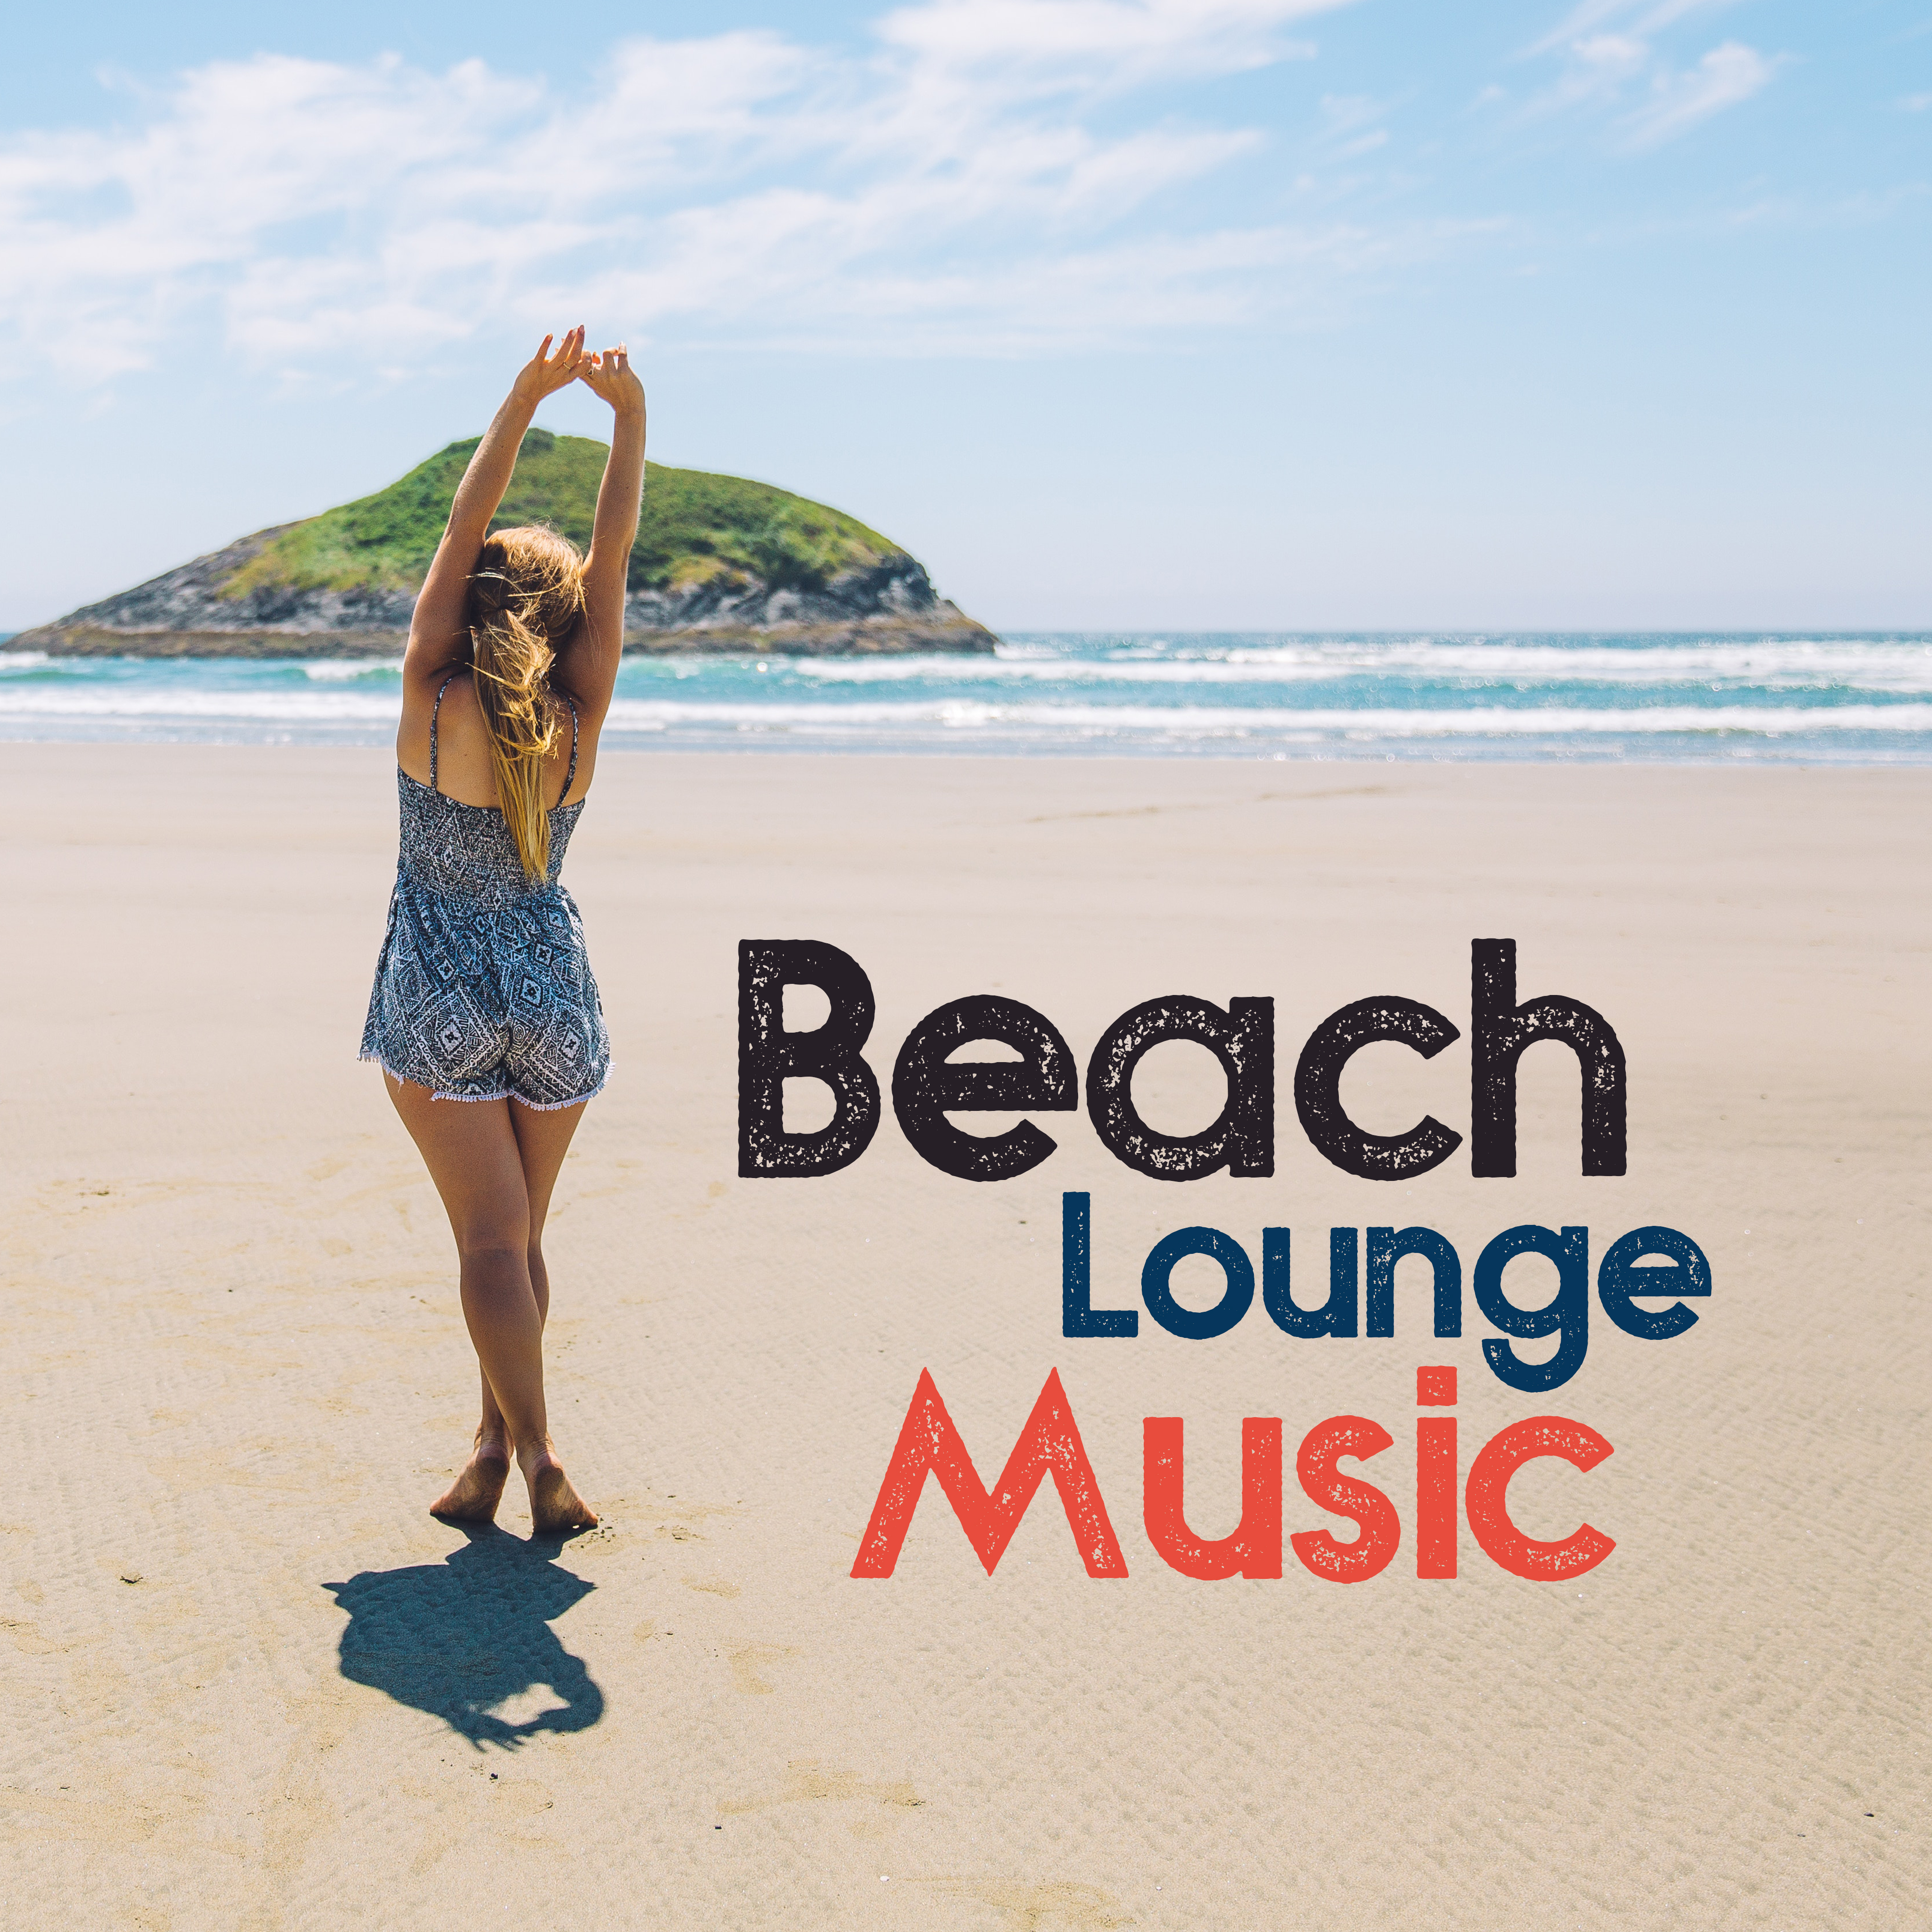 Beach Lounge Music  Sunset Beach Music, Sounds to Relax, Summer Vibes, Holiday 2017